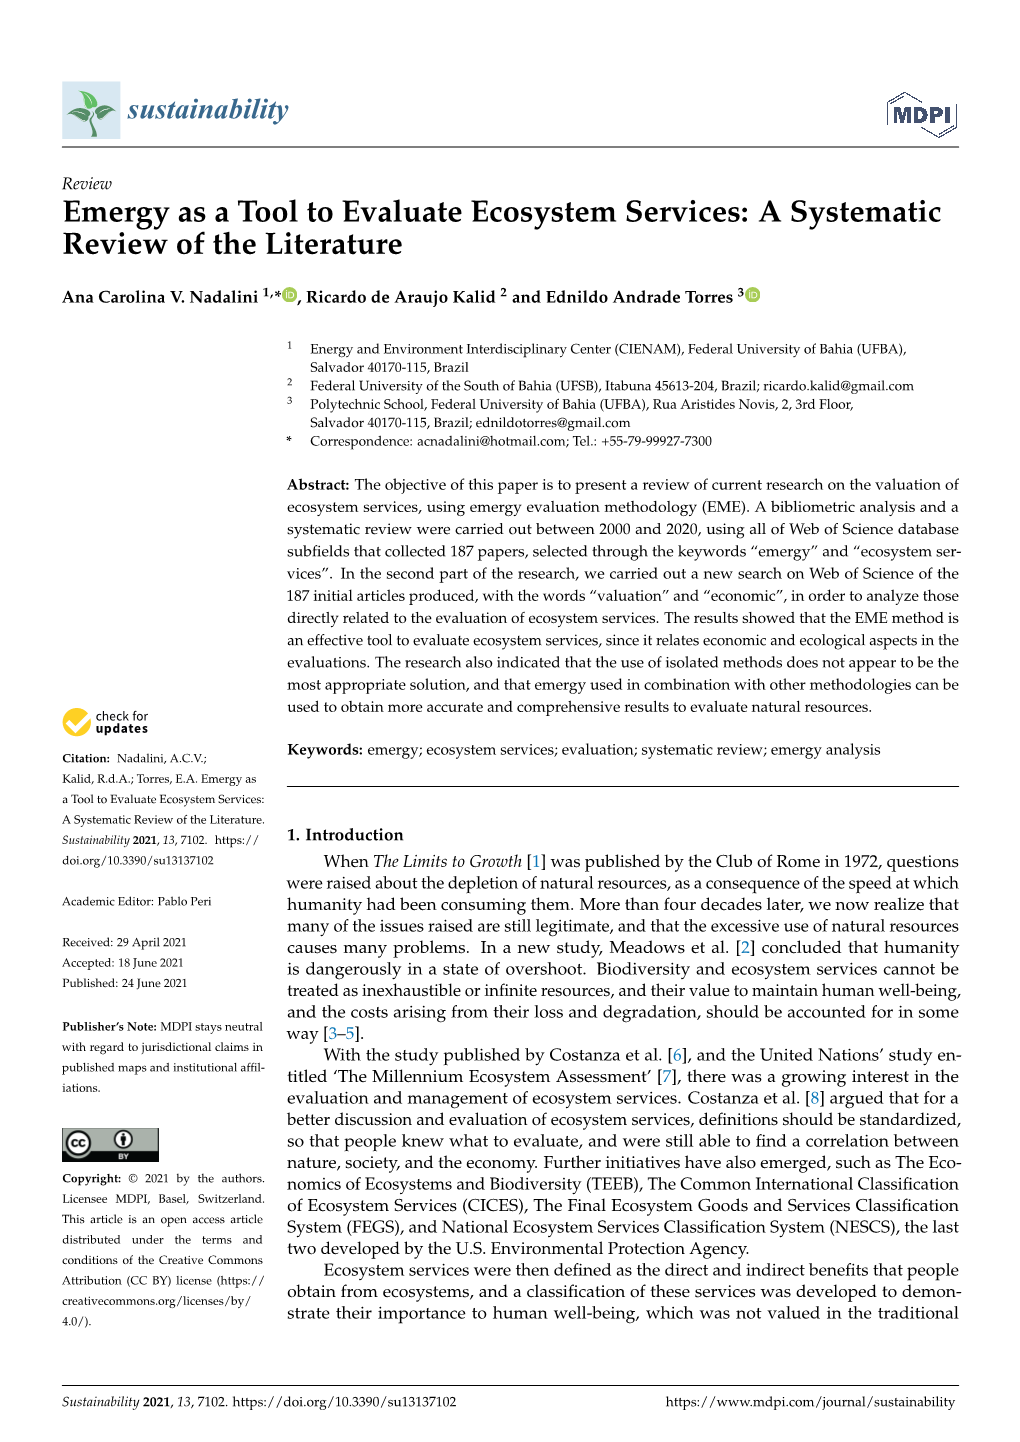 Emergy As a Tool to Evaluate Ecosystem Services: a Systematic Review of the Literature